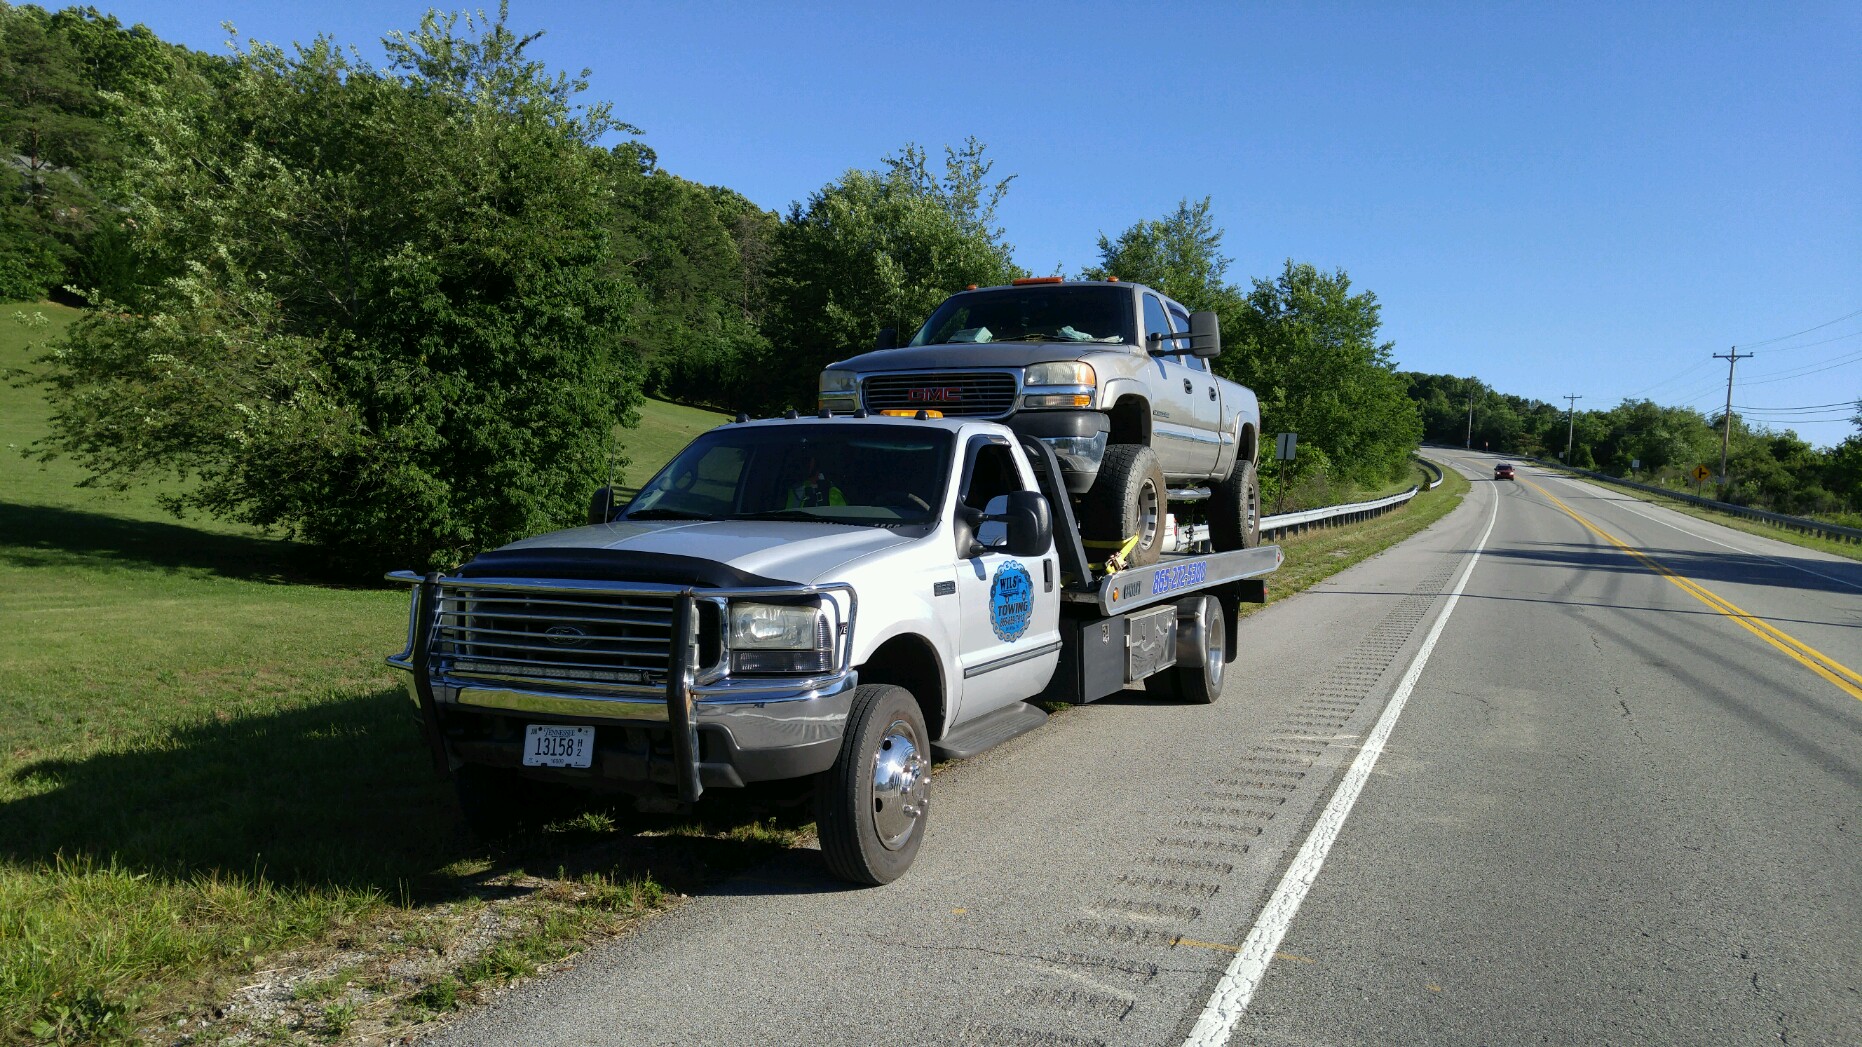 Wil's Towing